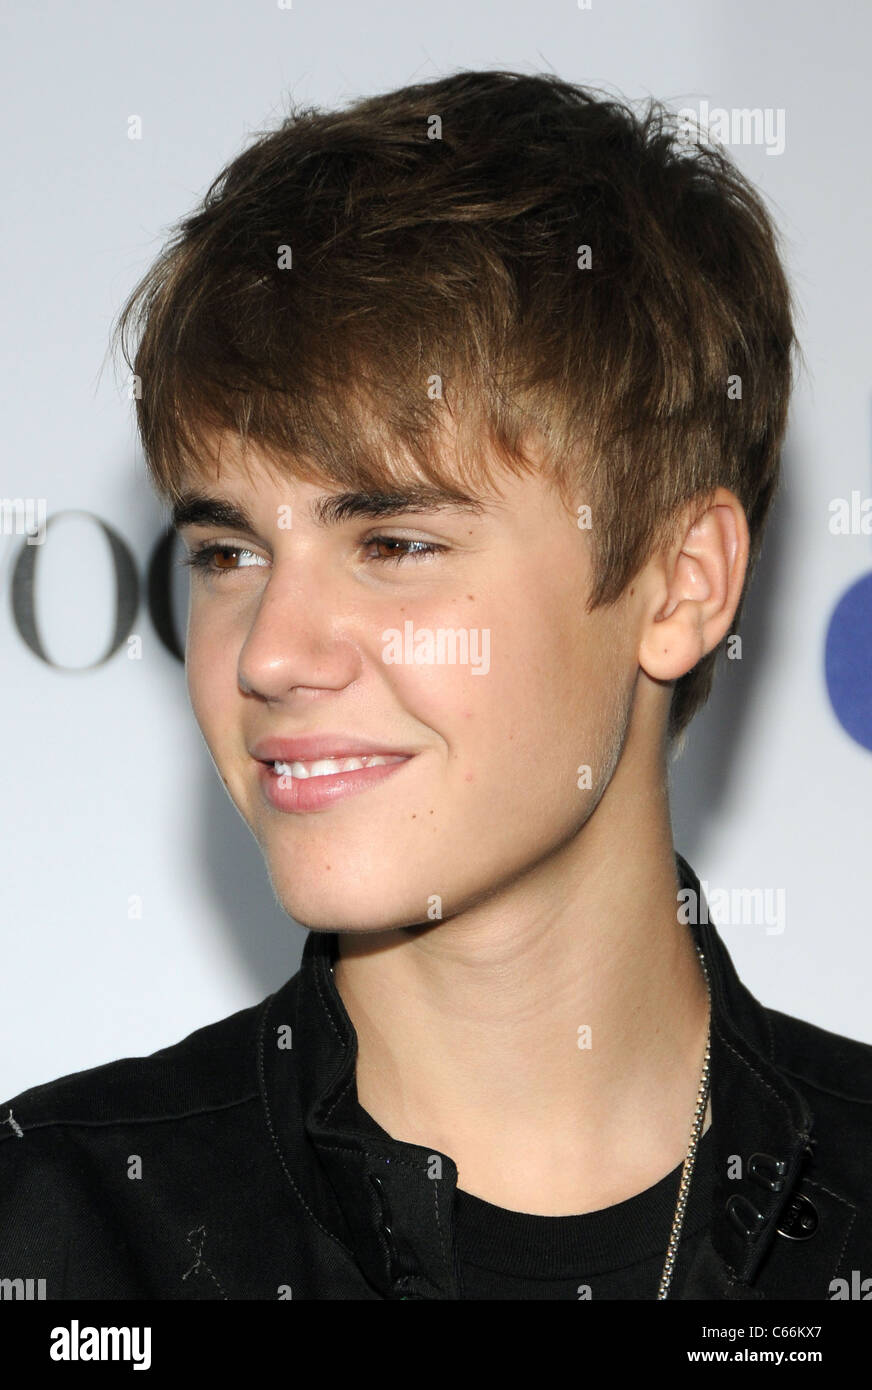 Justin Bieber at arrivals for MONTE CARLO Premiere, AMC Loews Lincoln Square Theater, New York, NY June 23, 2011. Photo By: Desiree Navarro/Everett Collection Stock Photo